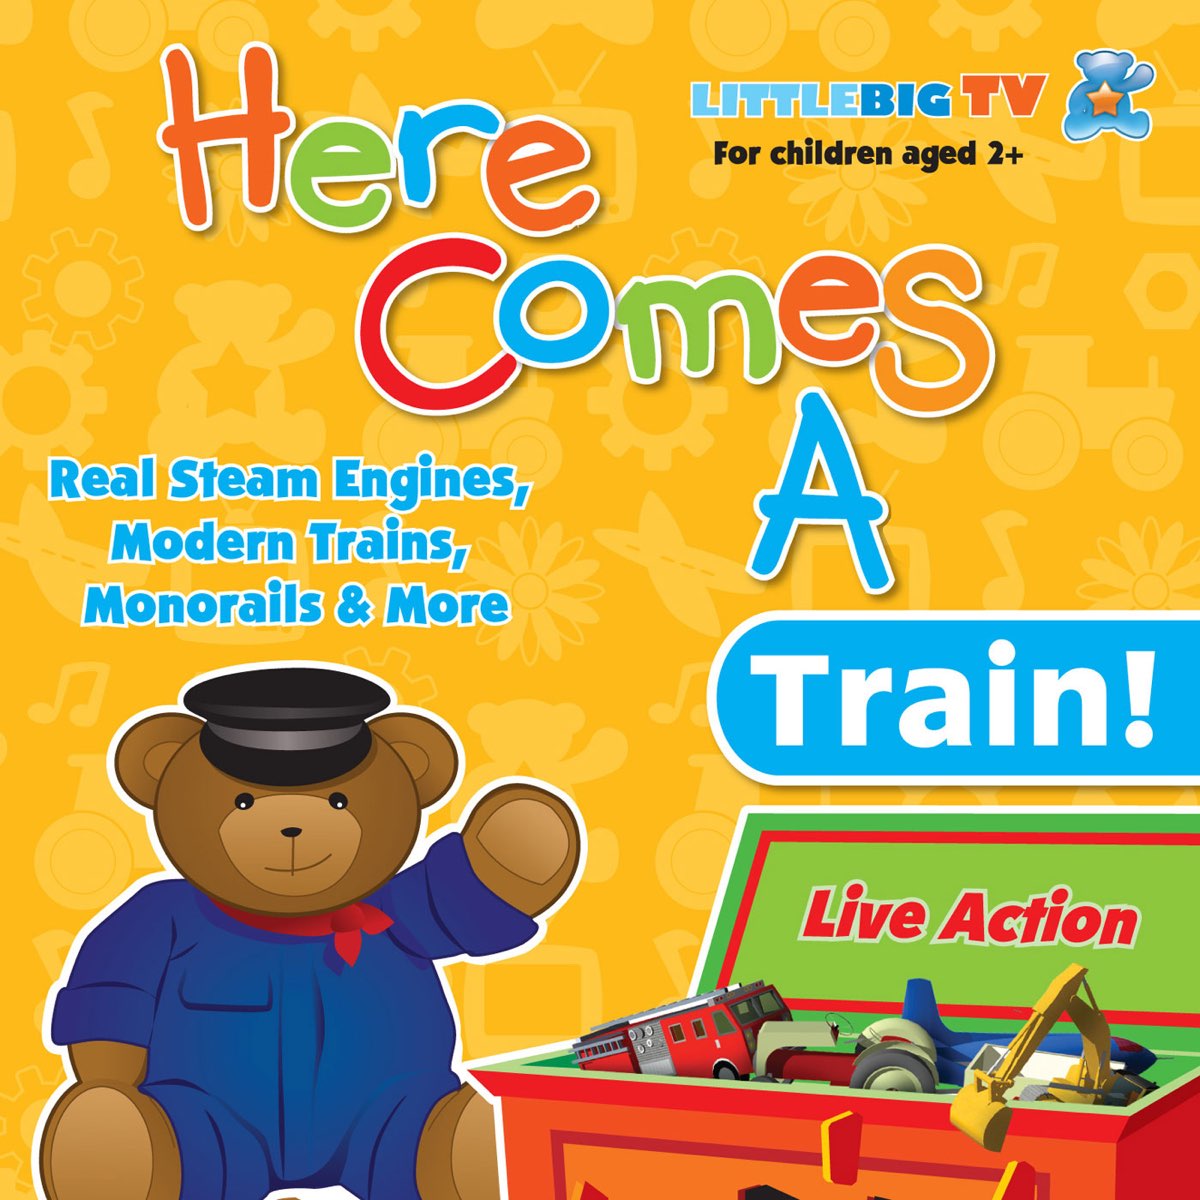 here-comes-a-train-ep-original-soundtrack-by-little-big-tv-on